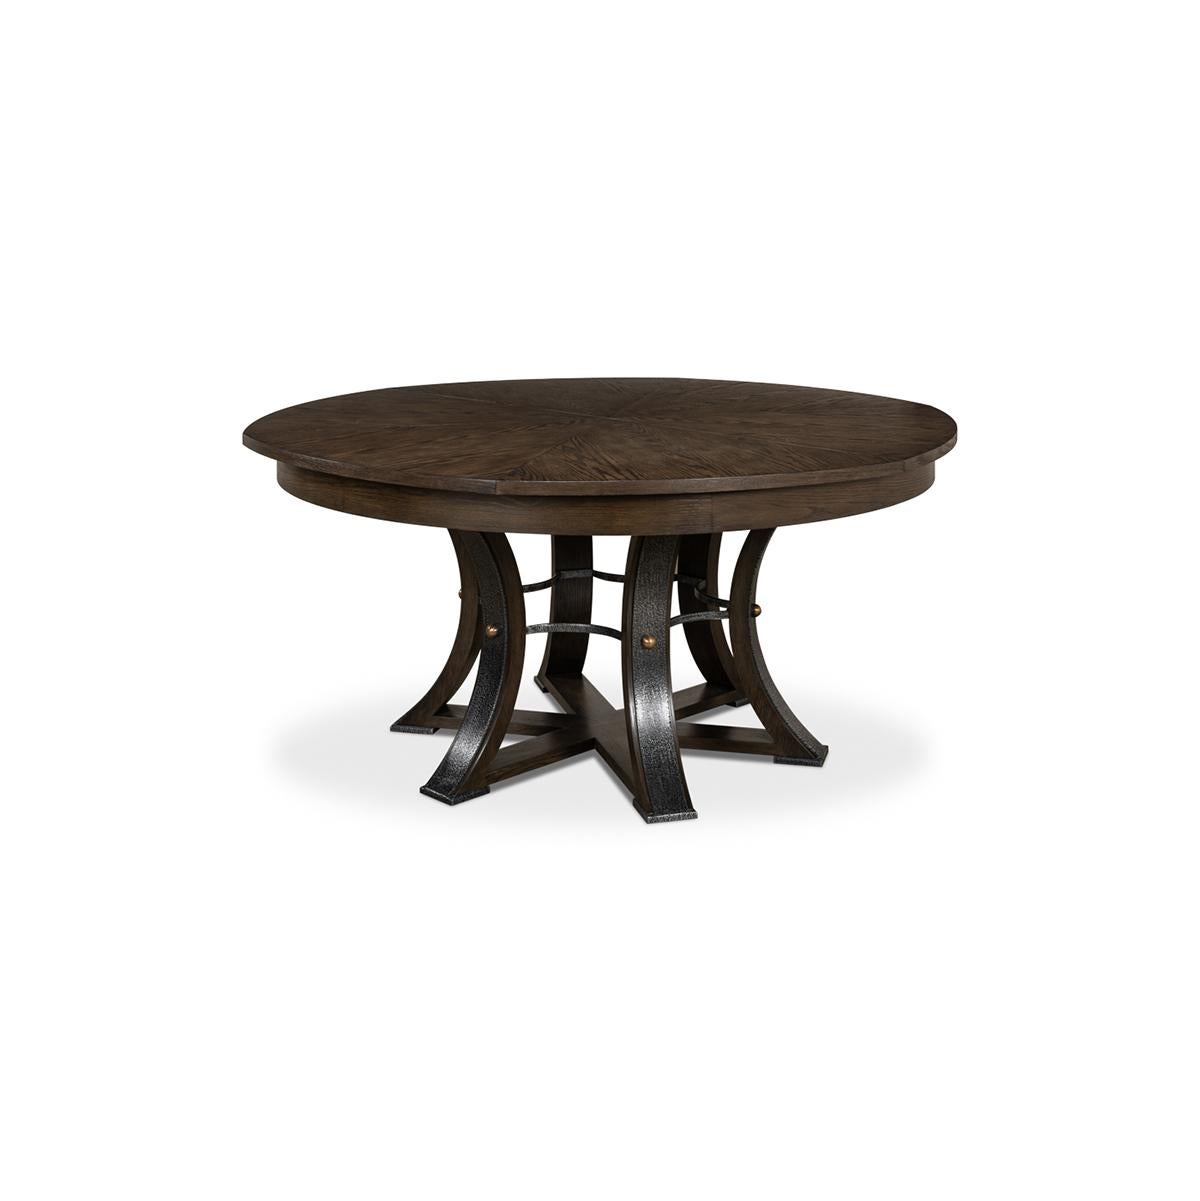 A modern industrial style round extending dining room table. Wire brushed oak top in our wire brushed oak finish with gunmetal iron accents to the simple geometric form base. The table opens and extends to 84